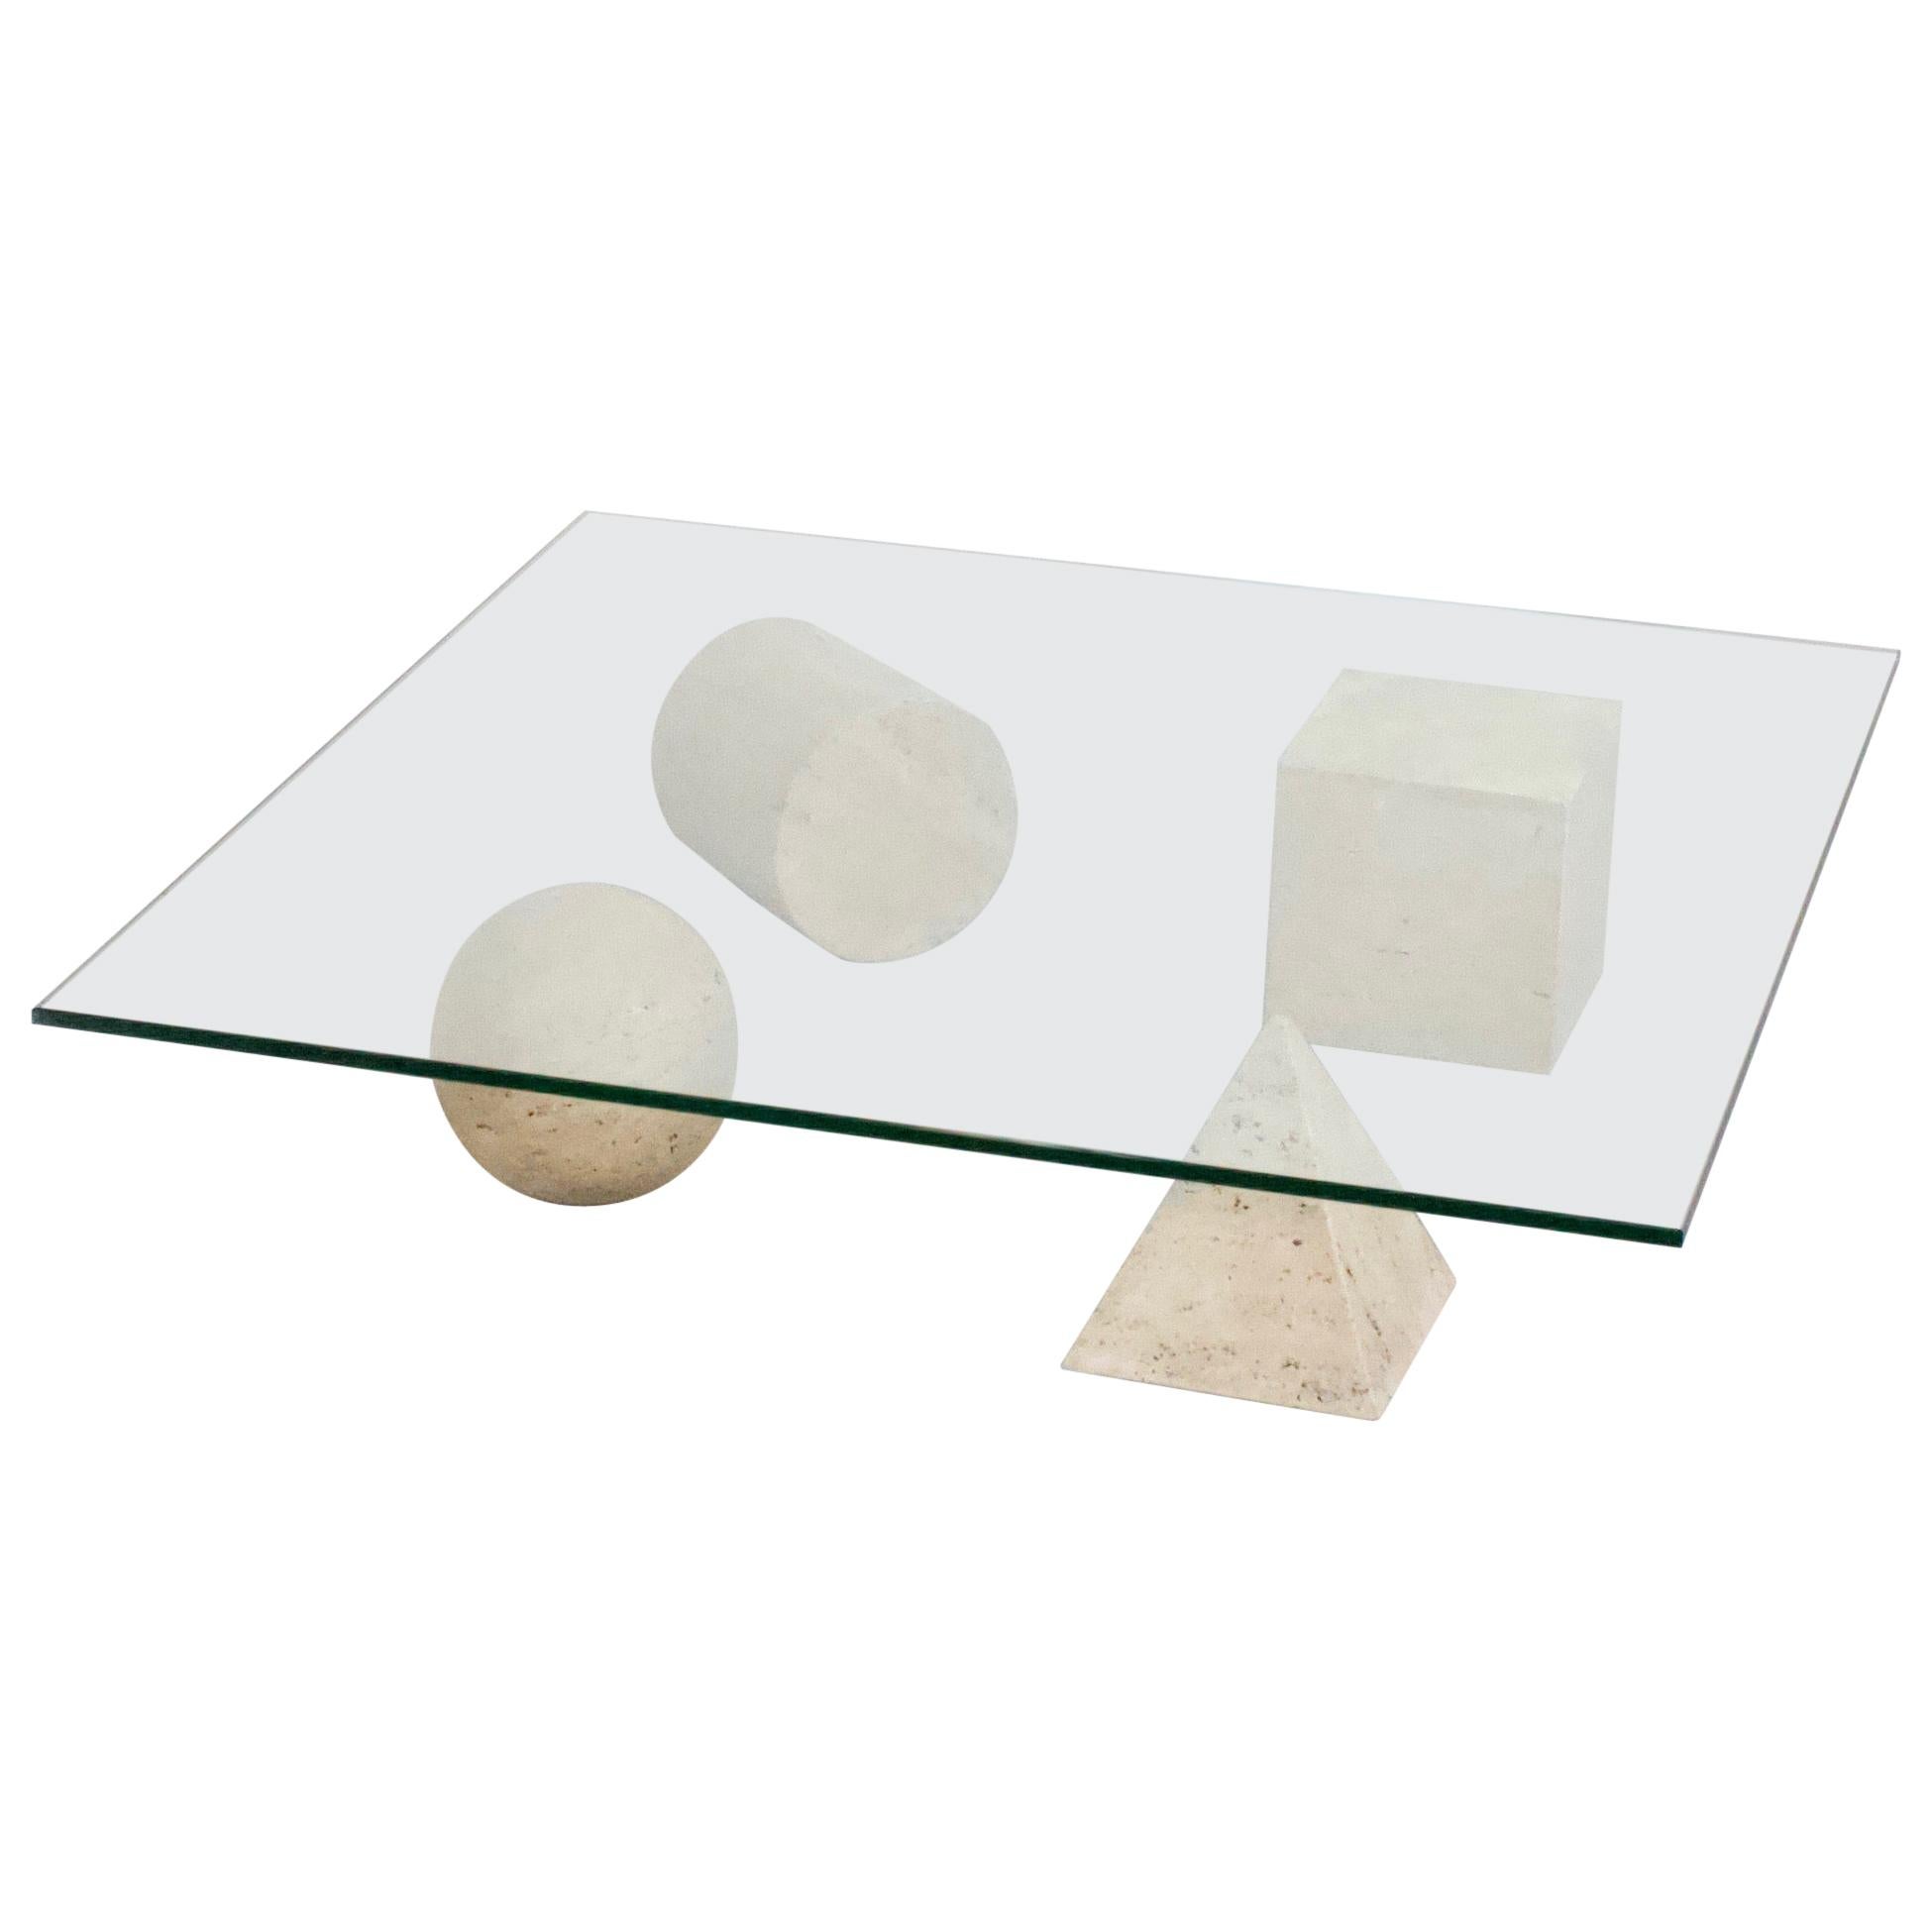 1970s Metaphora Coffee Table by Massimo and Lella Vignelli, Travertine and Glass